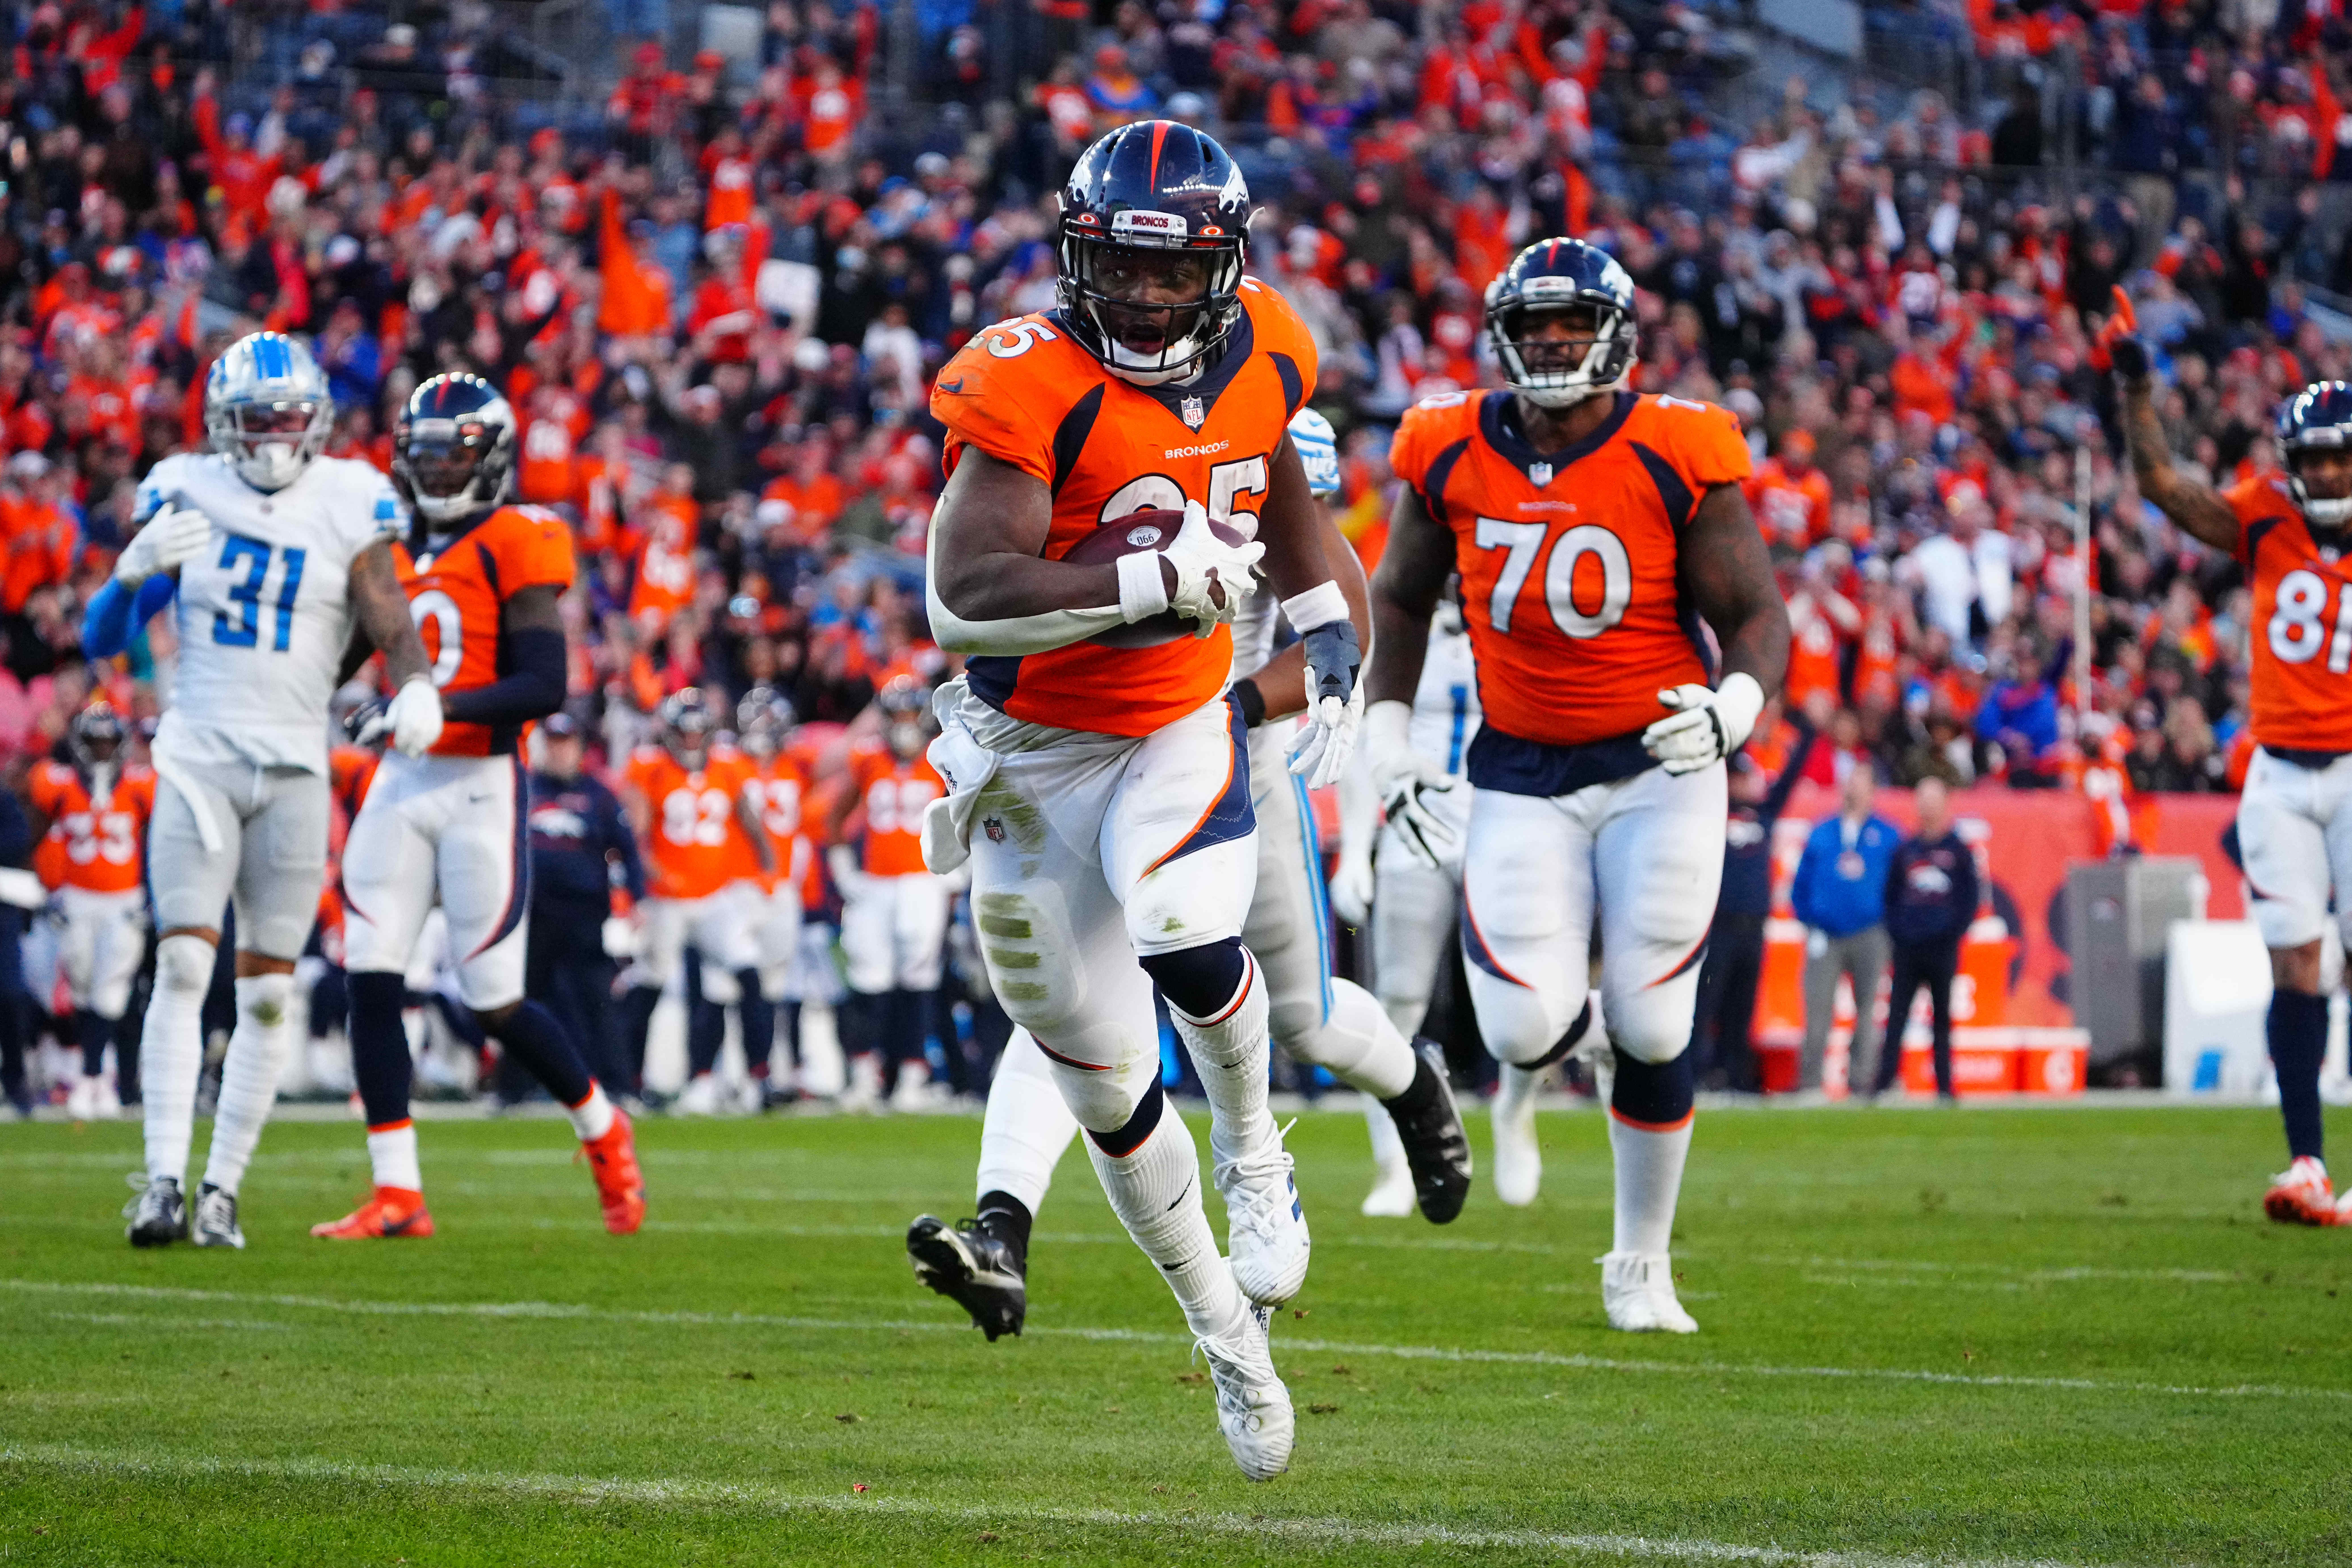 Denver Broncos running back Melvin Gordon III (25) carries for a touchdown in the third quarter against the Detroit Lions at Empower Field at Mile High.